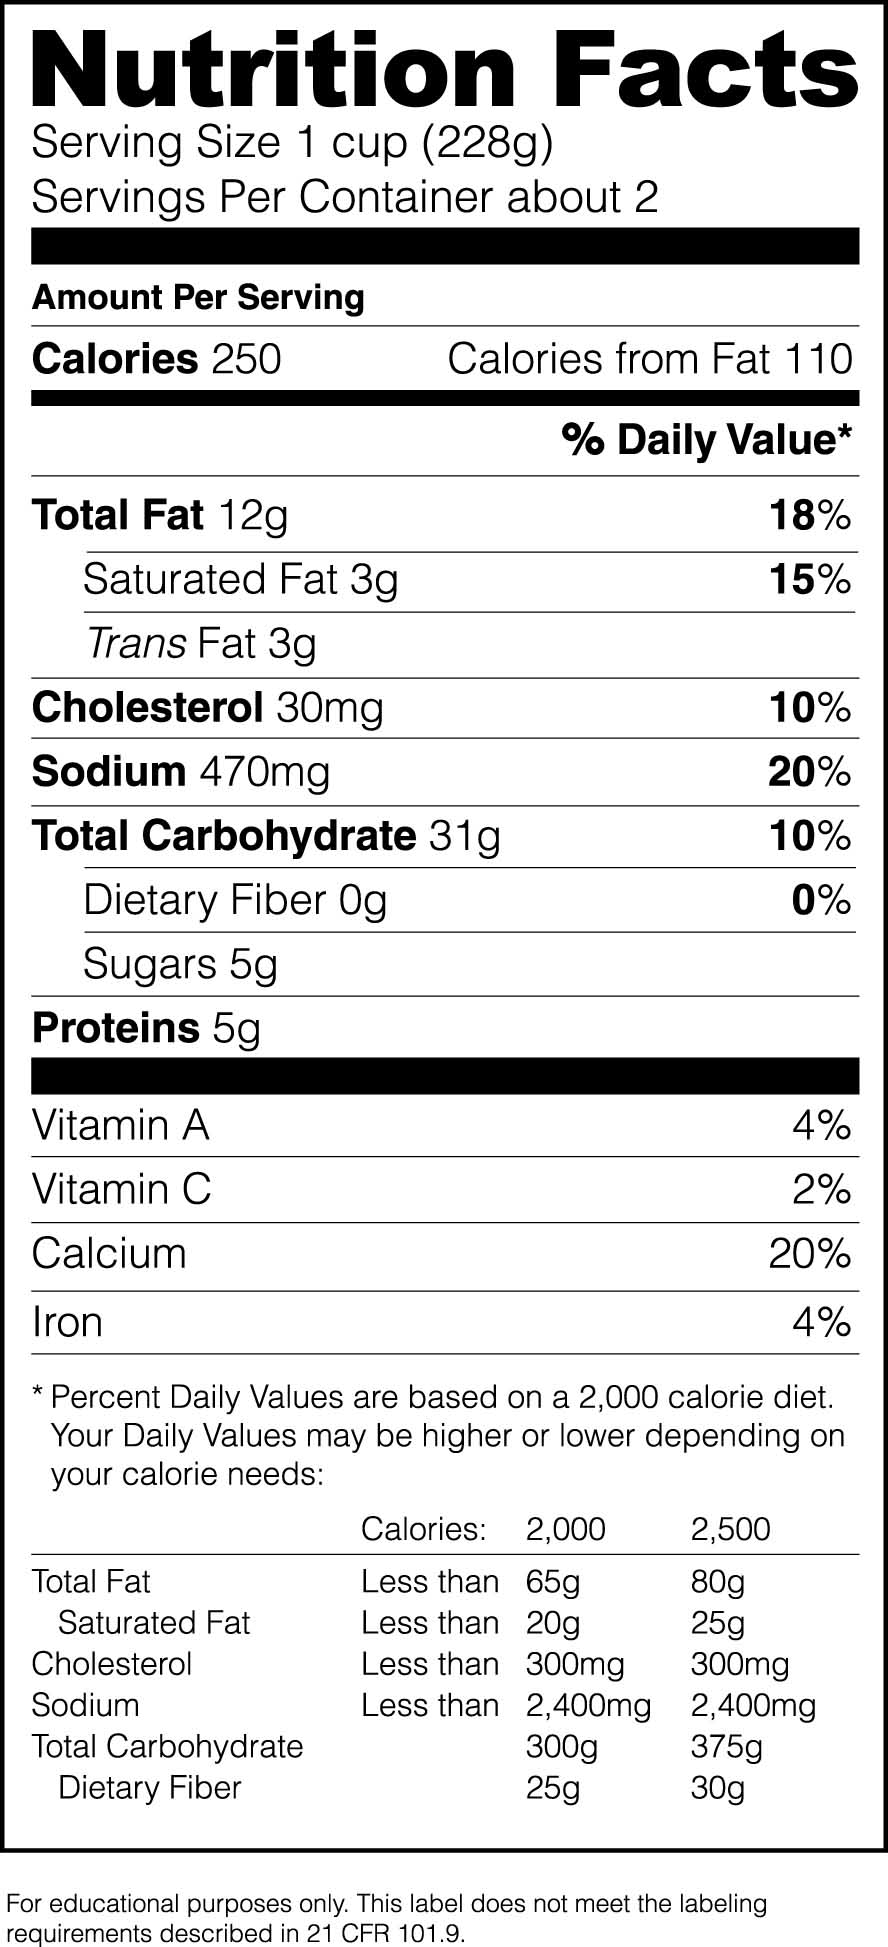 The Nutrition Facts rectangular label turns 20 years old in 2013.